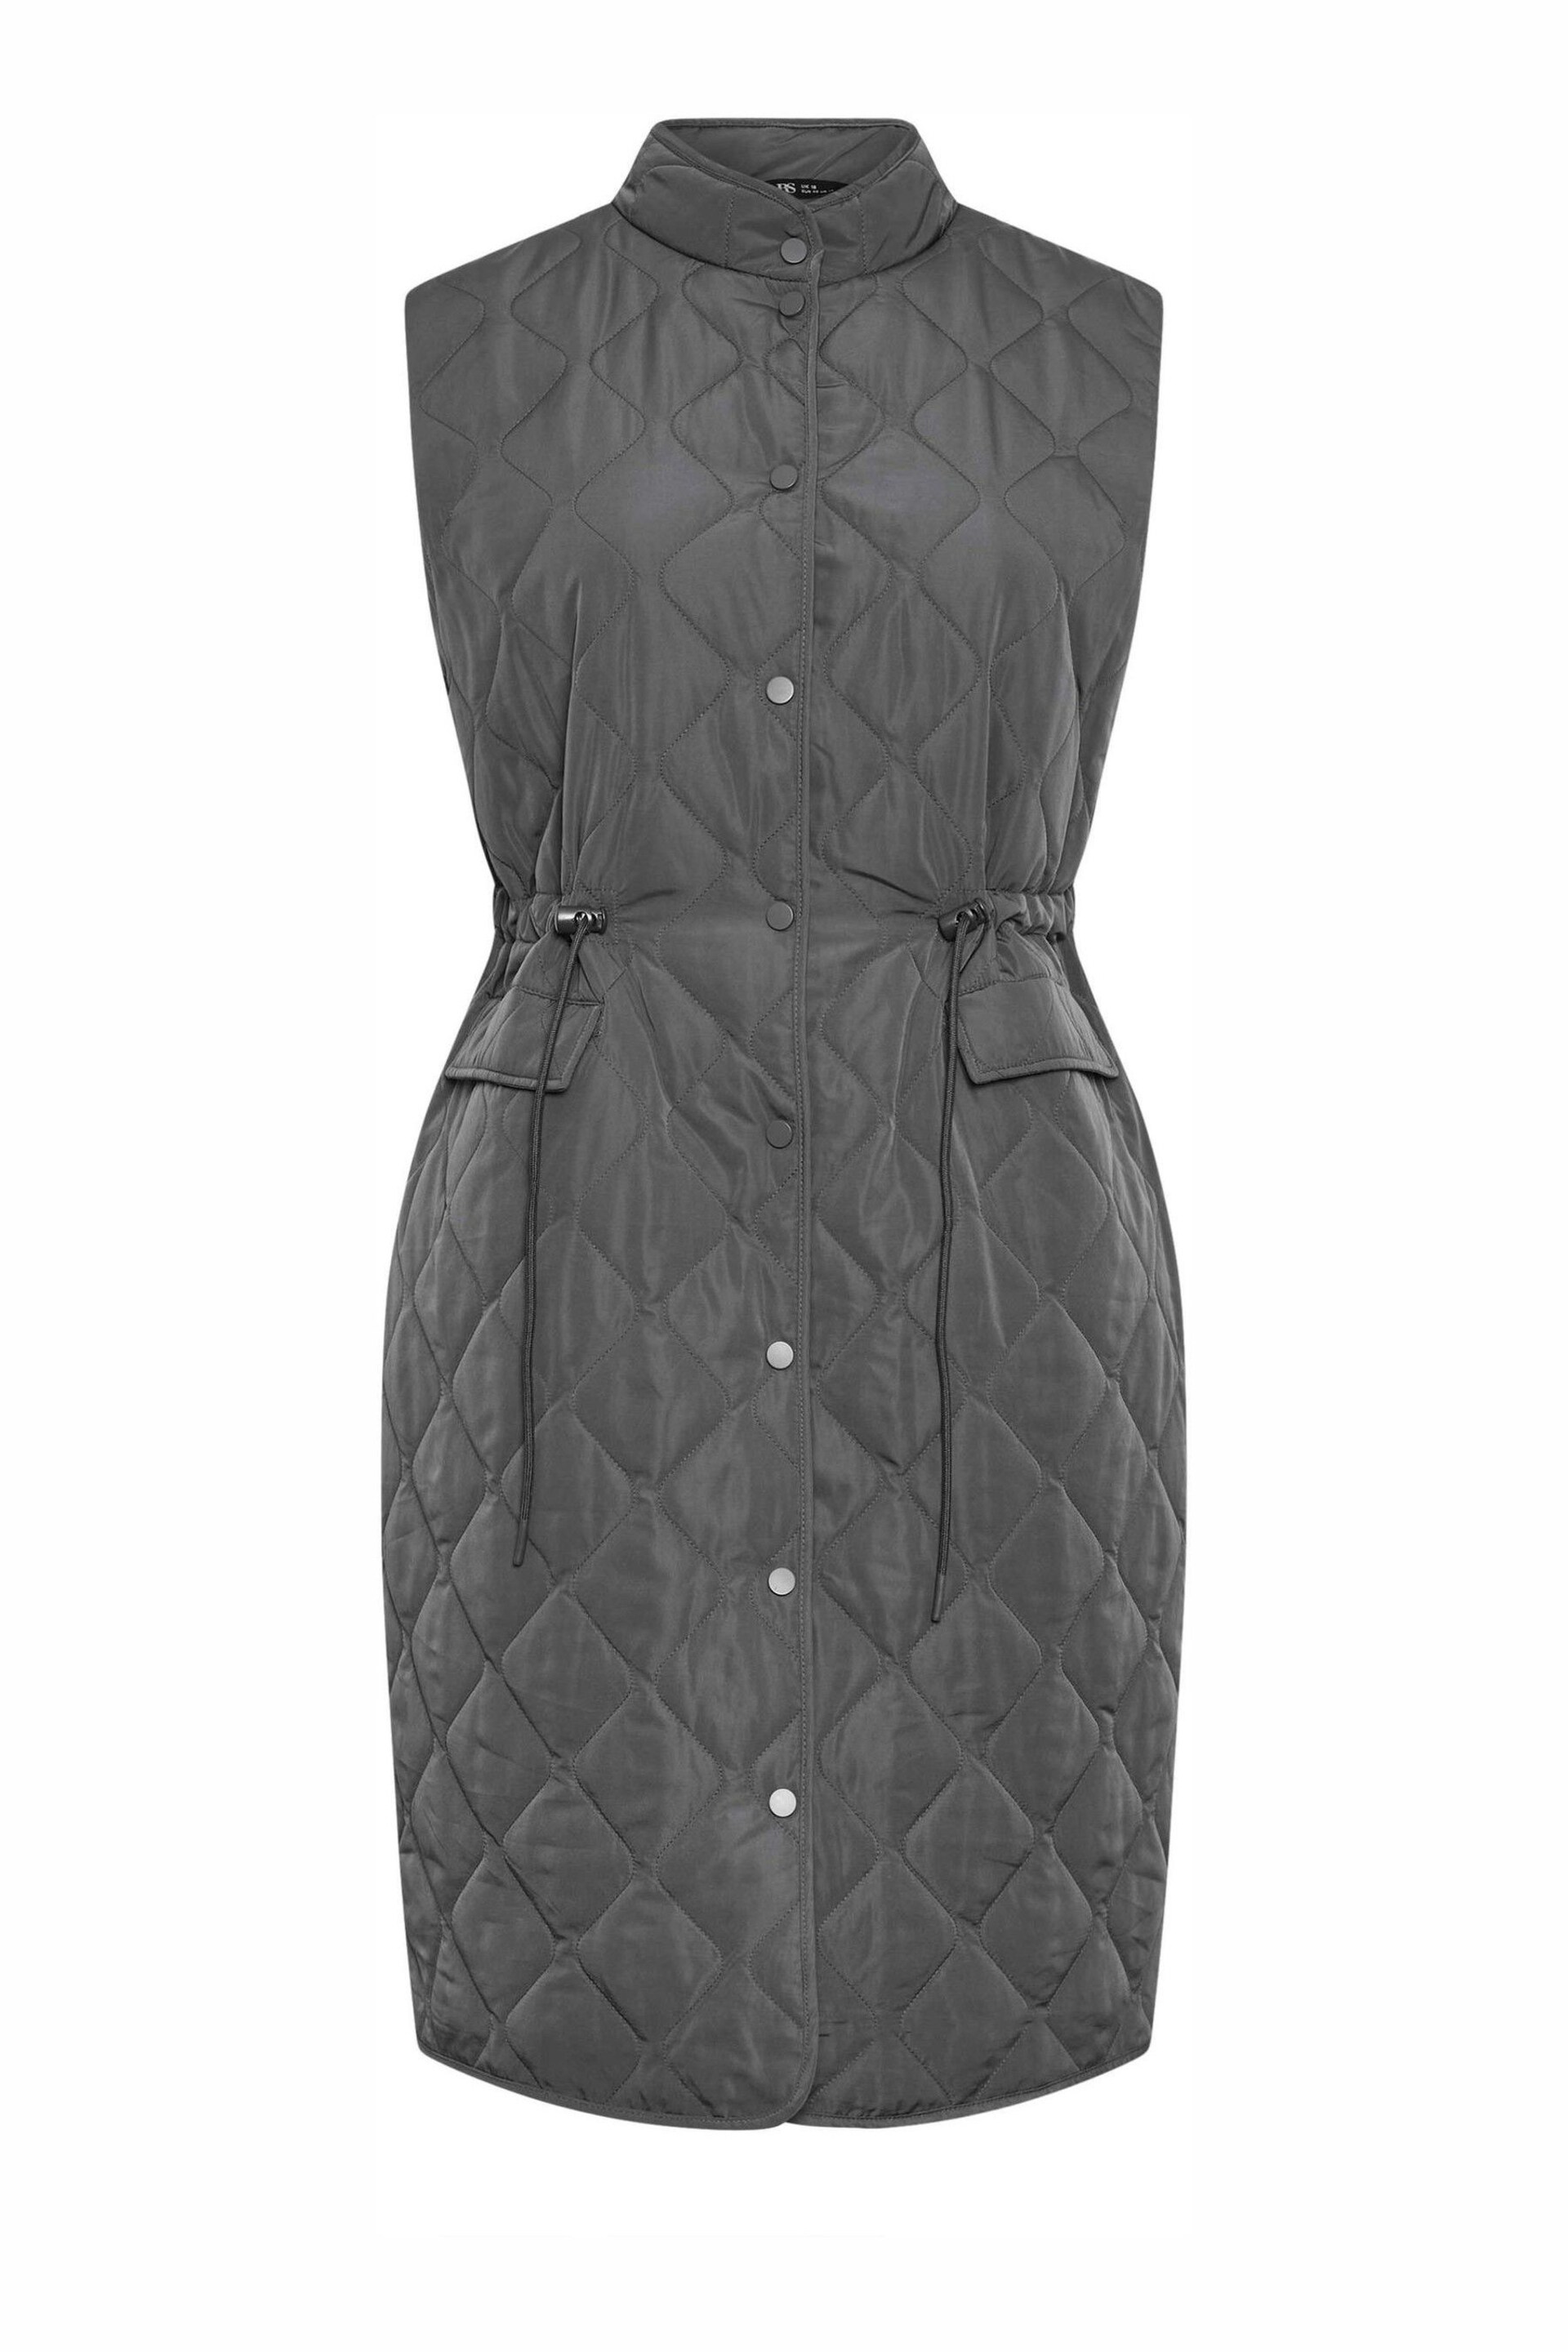 Yours Curve Grey Midi Lightweight Gilet - Image 2 of 2